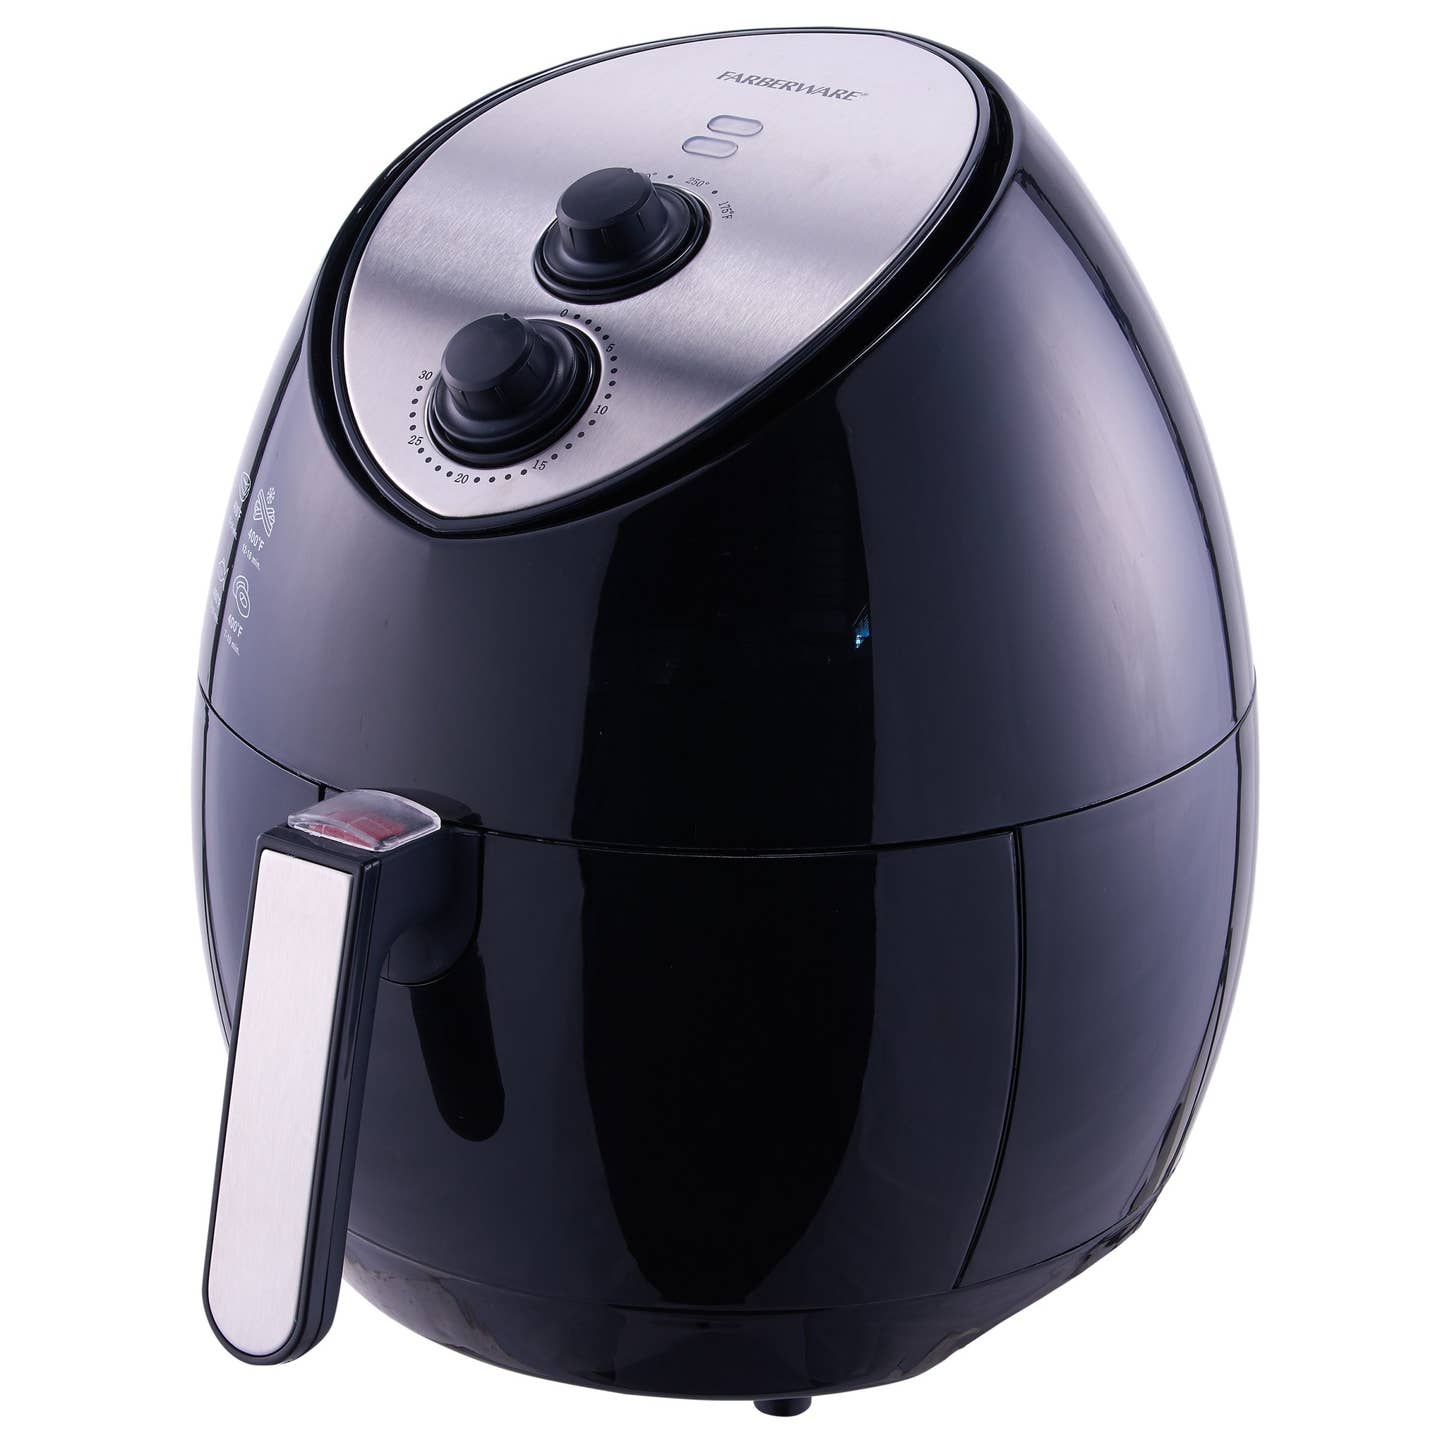 Walmart Air Fryer Deal: Get This Top-Rated Kitchen Tool For $30